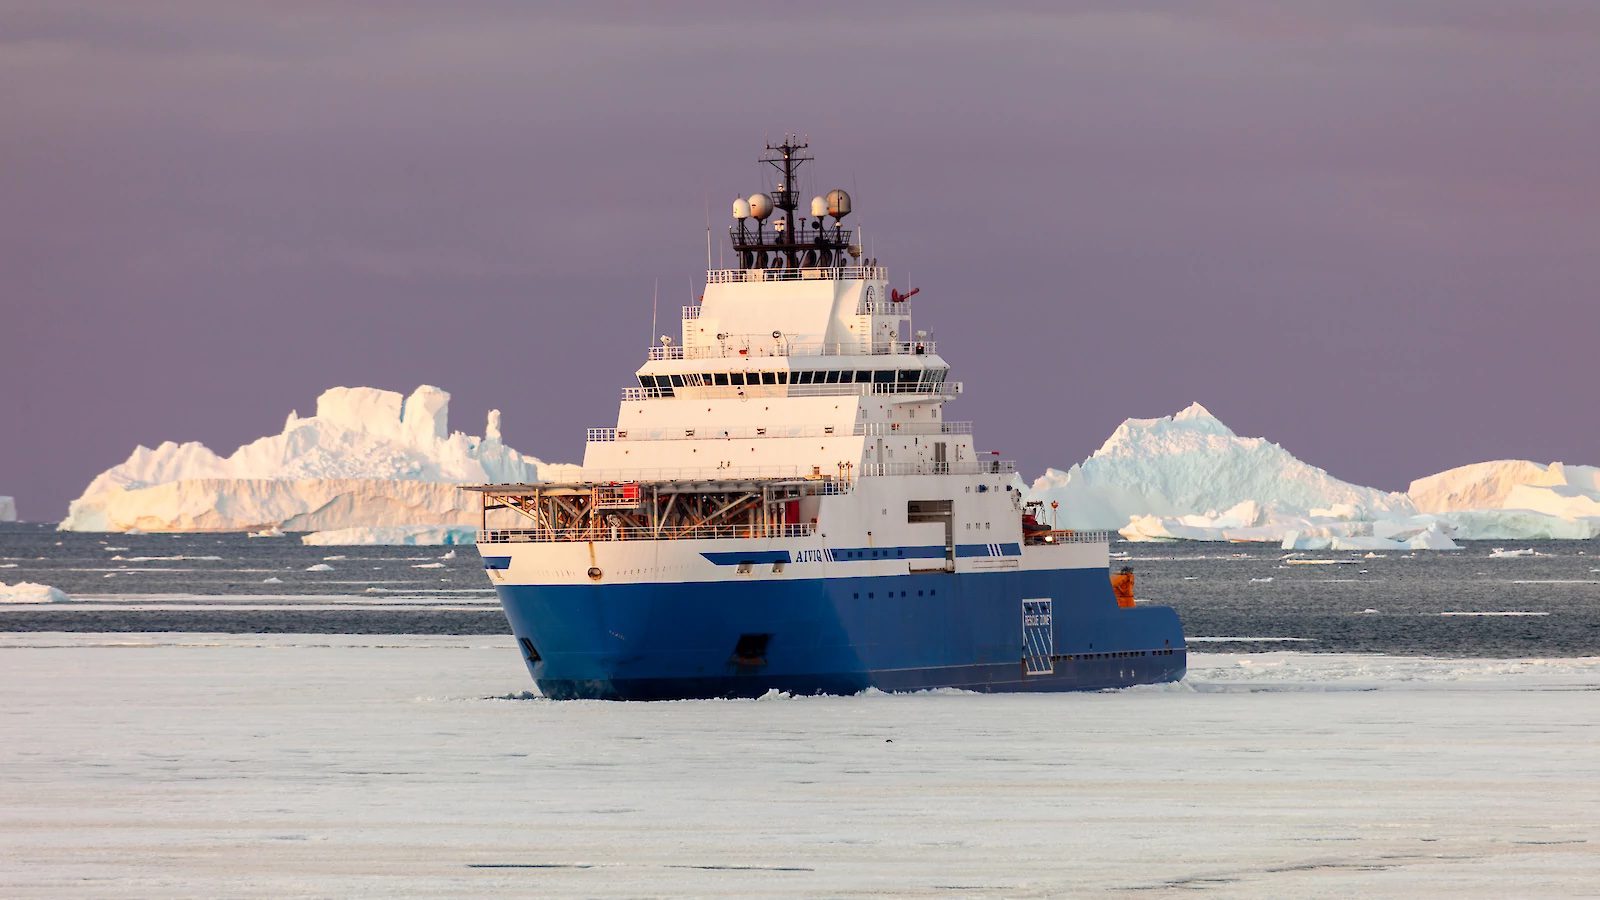 The icebreaker Aiviq completing refuelling operations at Davis Research Station. Photo: Kirk Yatras via Australian Antarctic Division